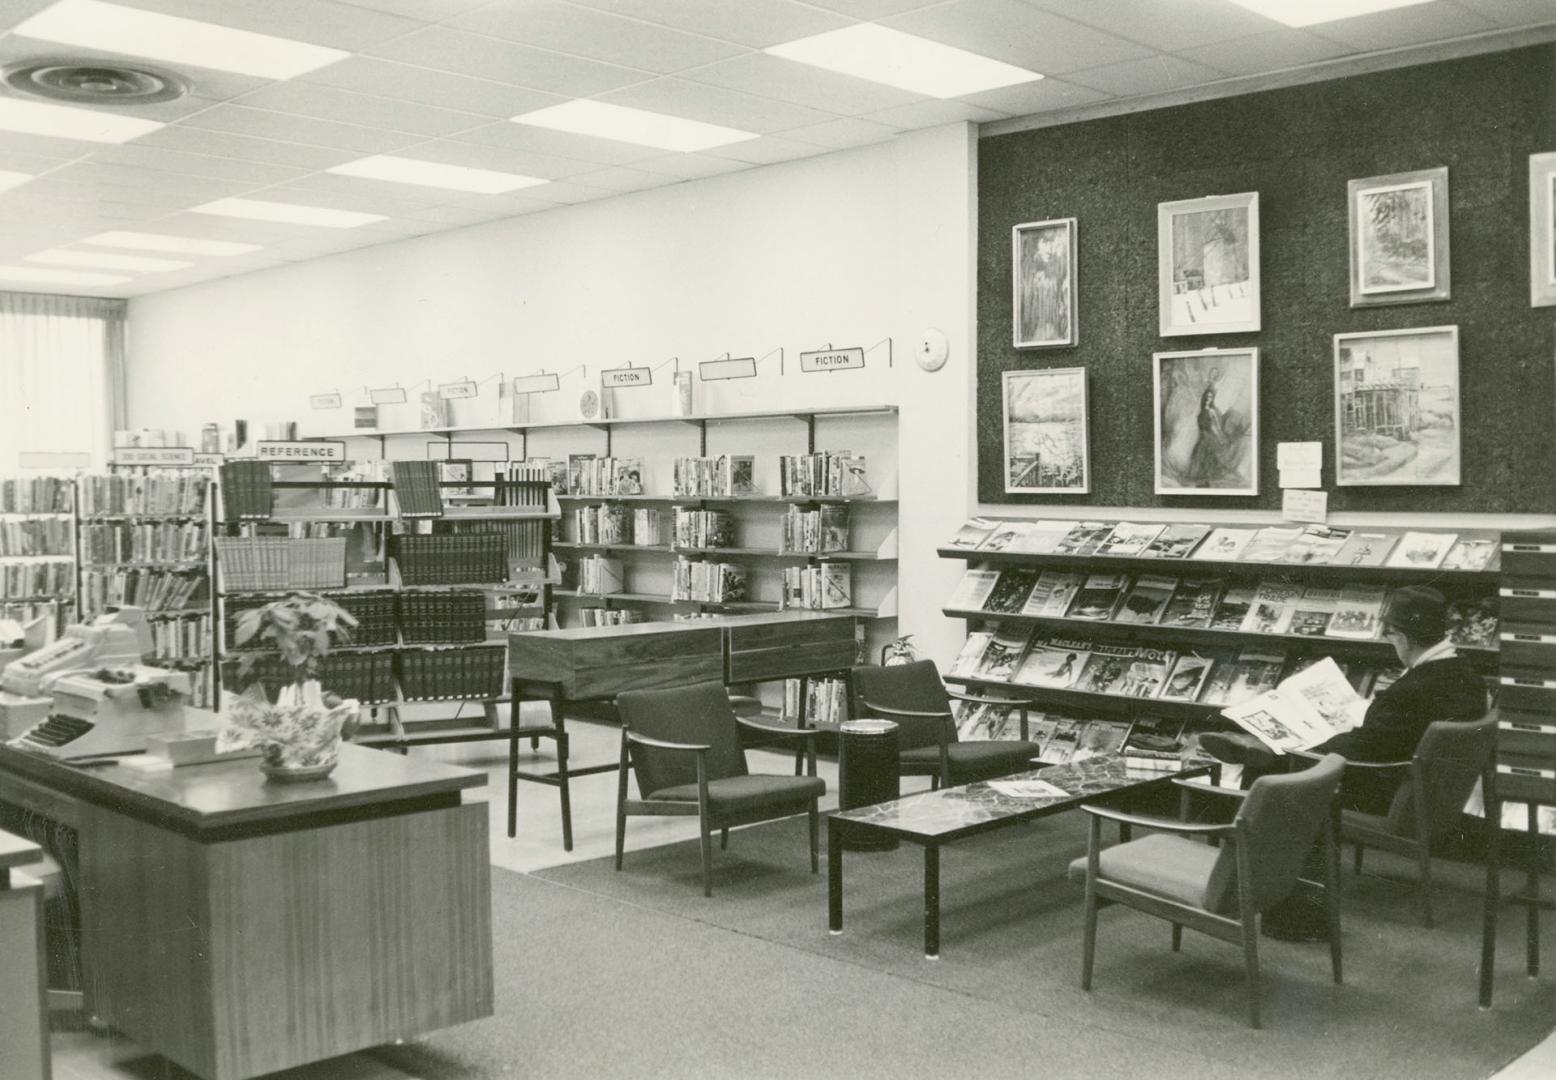 Picture of the interior of a library showing shelving and seating area with magazines. 